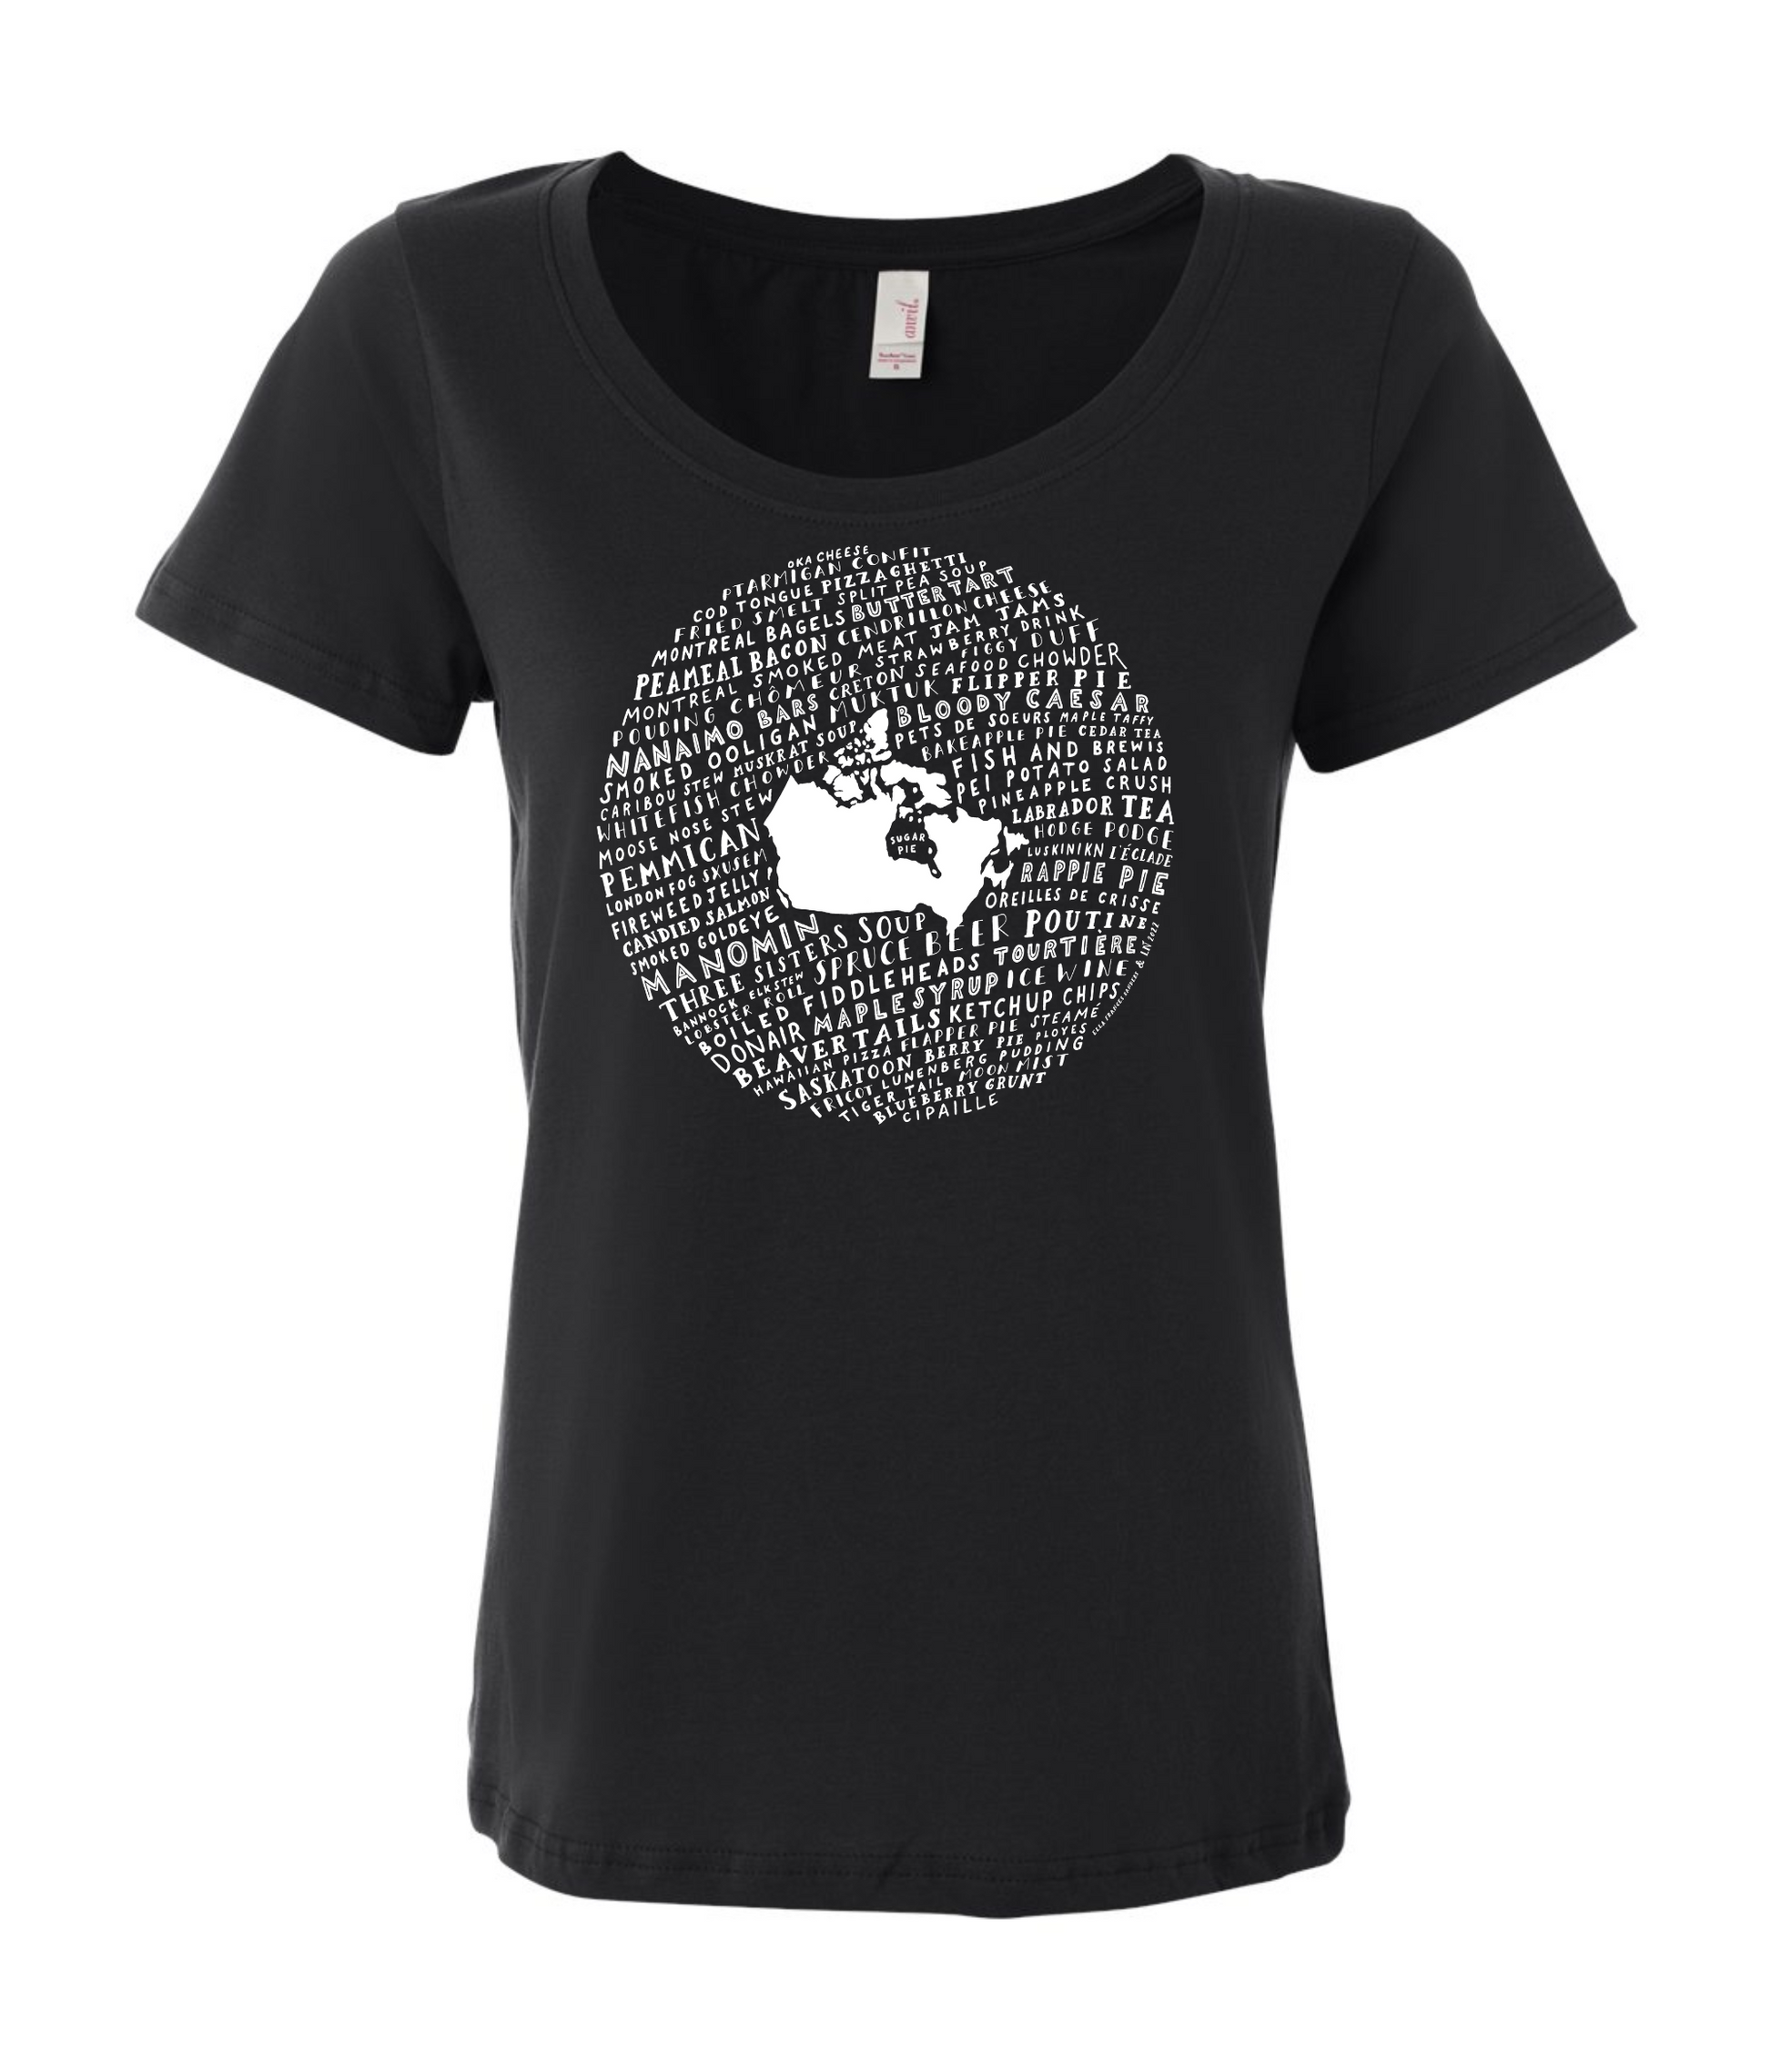 Food Map of Canada T-Shirt - Women's Black Soft Tee – The Legal